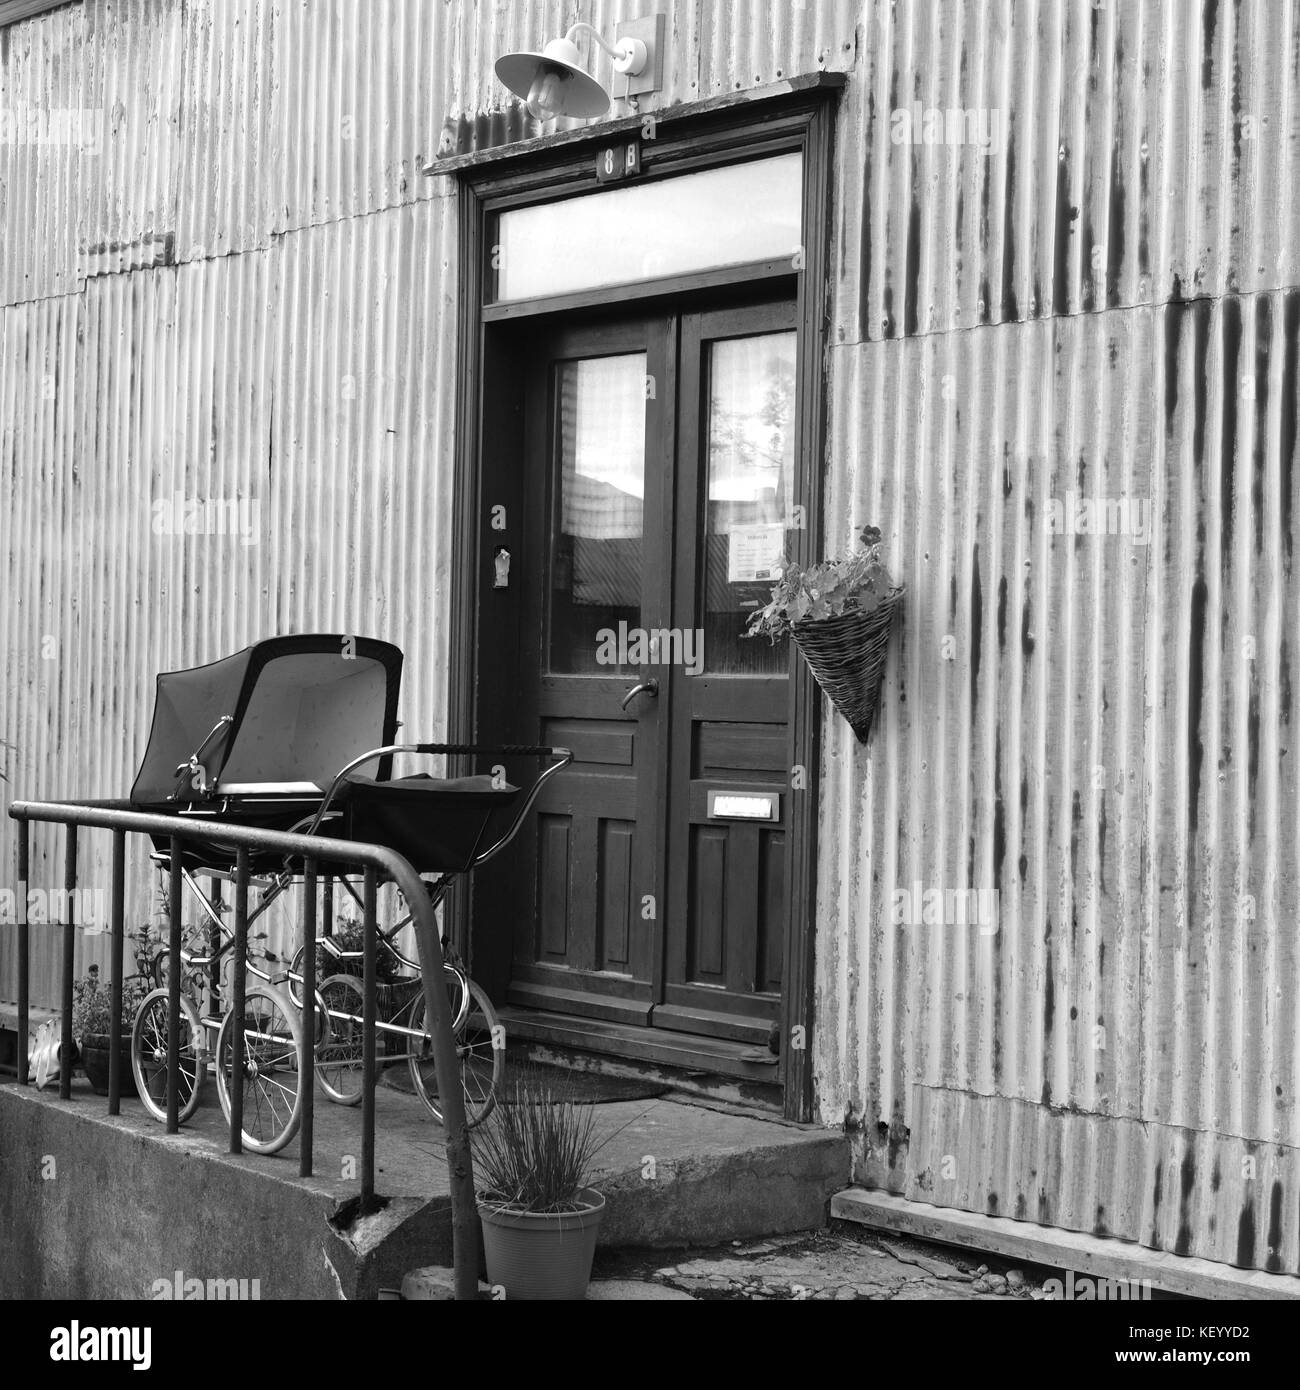 Old style vintage baby pram on front porch outside door of old house in black and white monochrome archival style square image, Reykjavik, Iceland Stock Photo